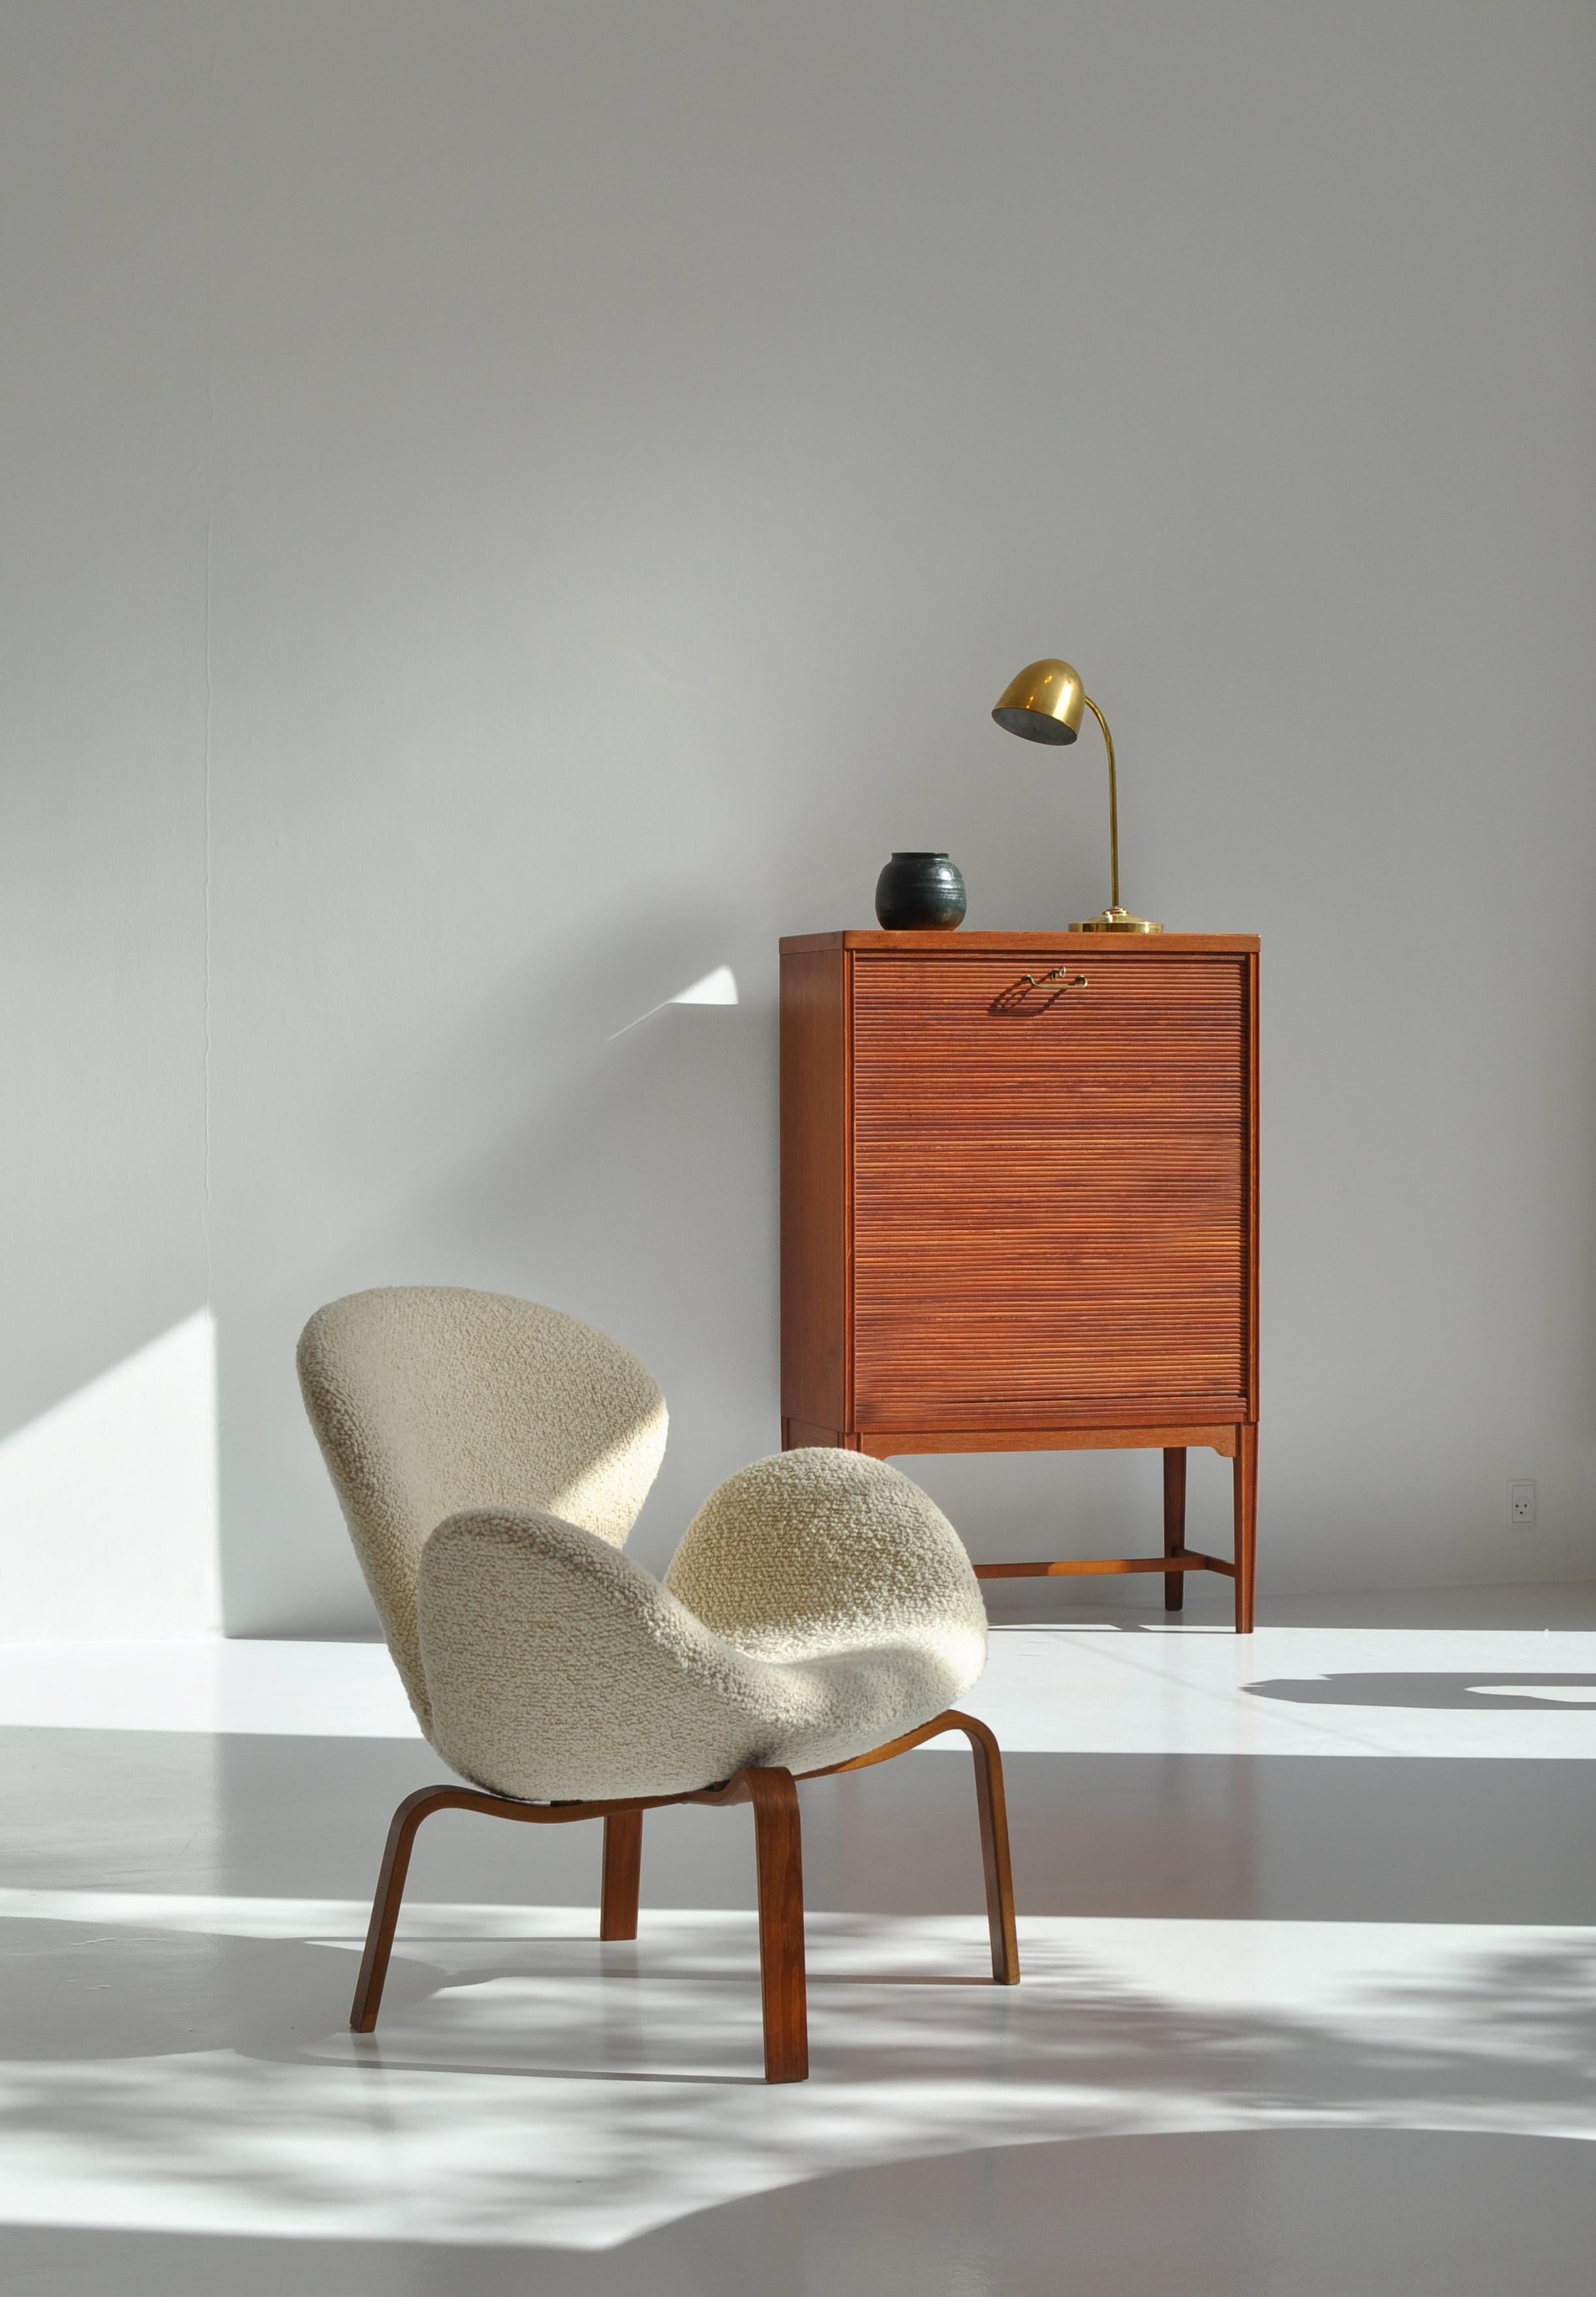 Rare lounge chair by Arne Jacobsen designed in 1960 and produced in limited numbers in the 1960s by Fritz Hansen, Copenhagen (Model FH-4325). This rare edition has a wooden base in laminated teak that was only made in very small numbers and went out